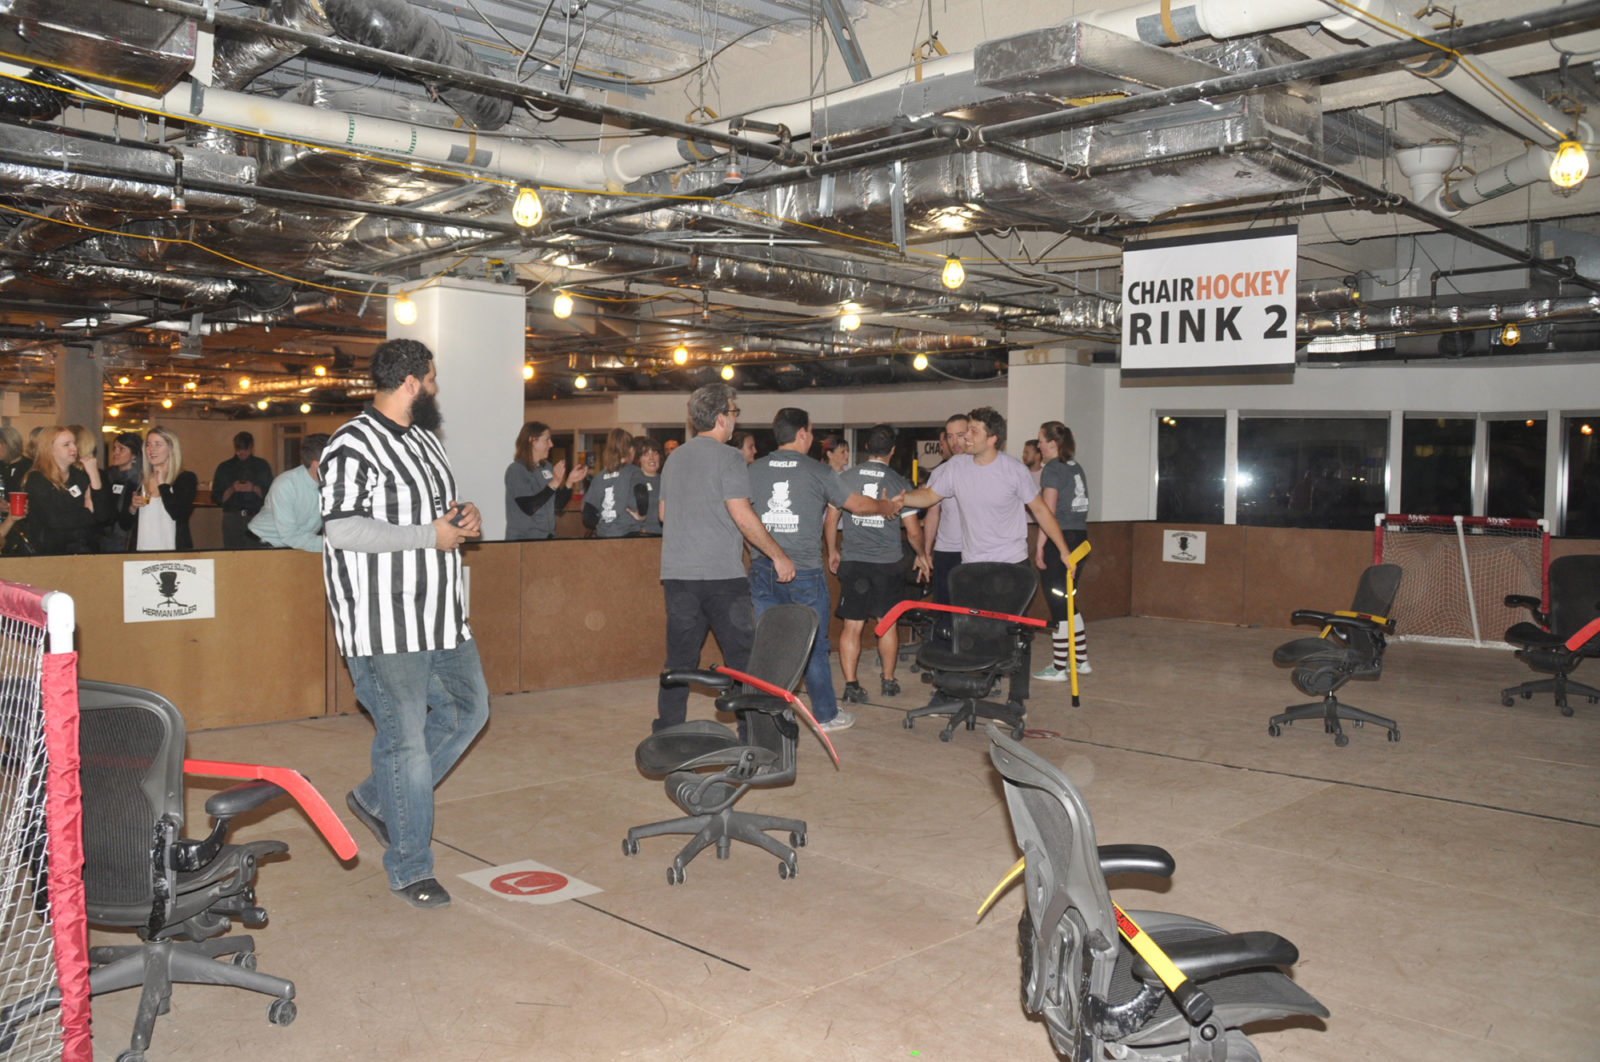 Indoor hockey rink with players shaking hands after match. They just finished a game of chair hockey, playing hockey in Herman Miller Aeron chairs.